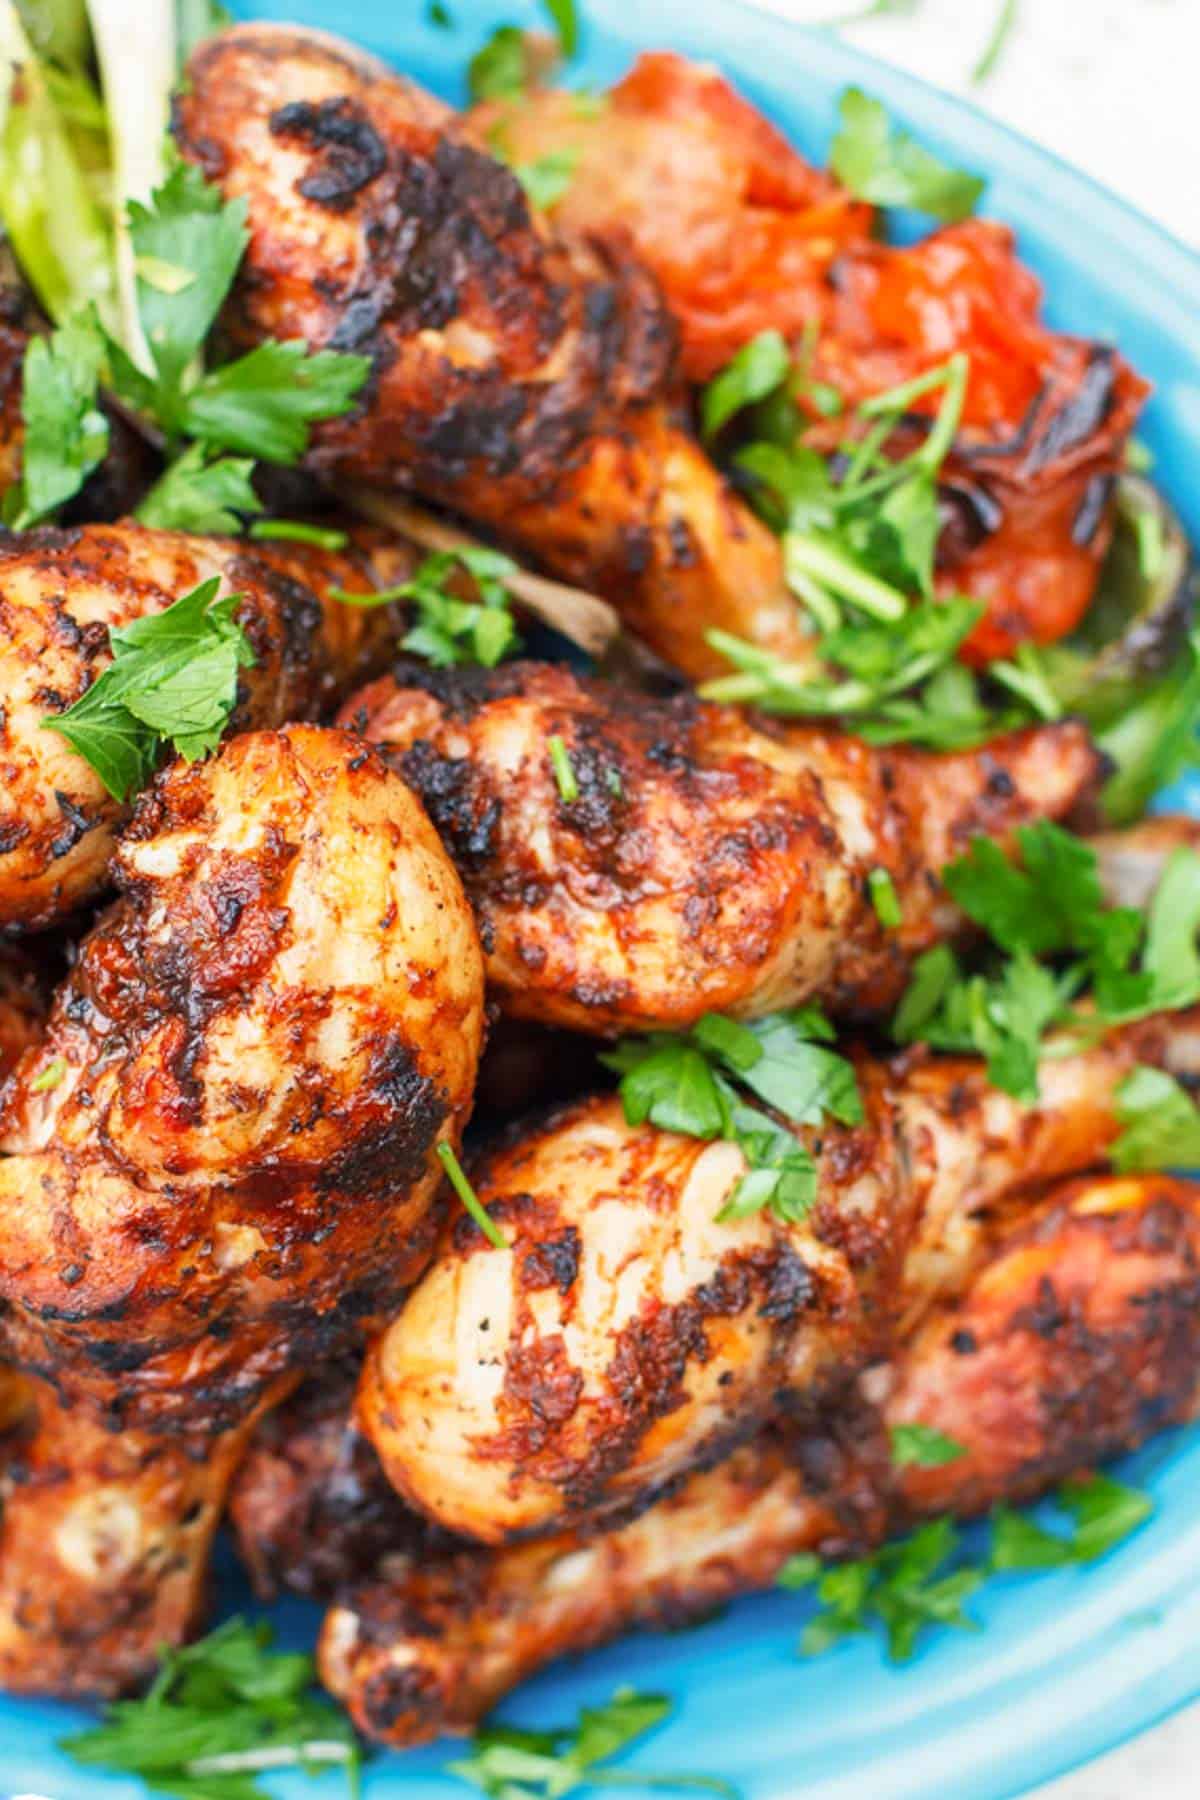 A close up of grilled chicken drumsticks garnished with parsley on a serving platter.